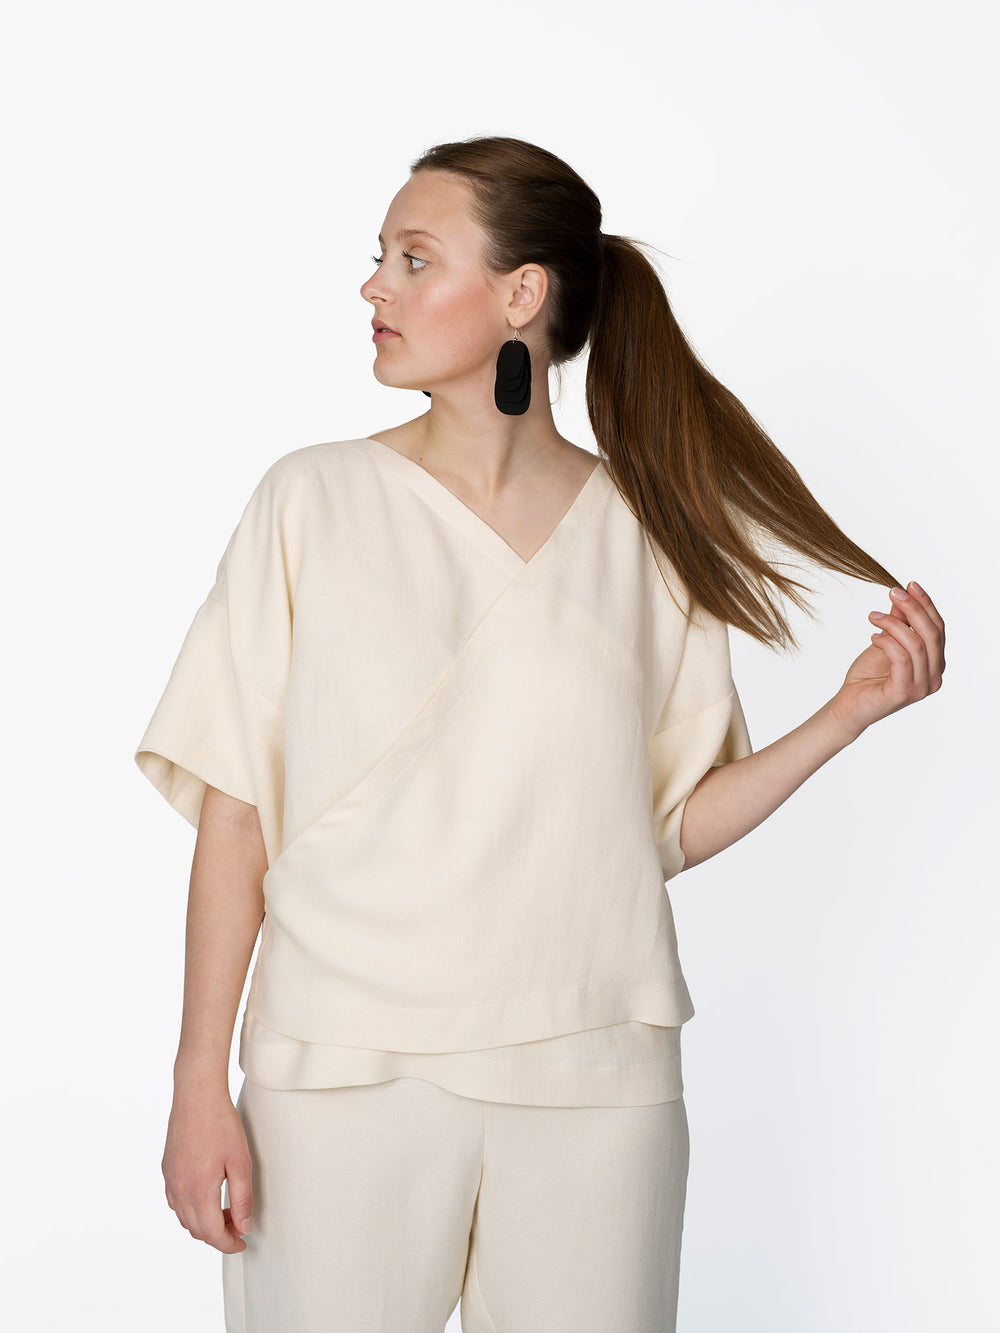 The Assembly Line Wrap Top